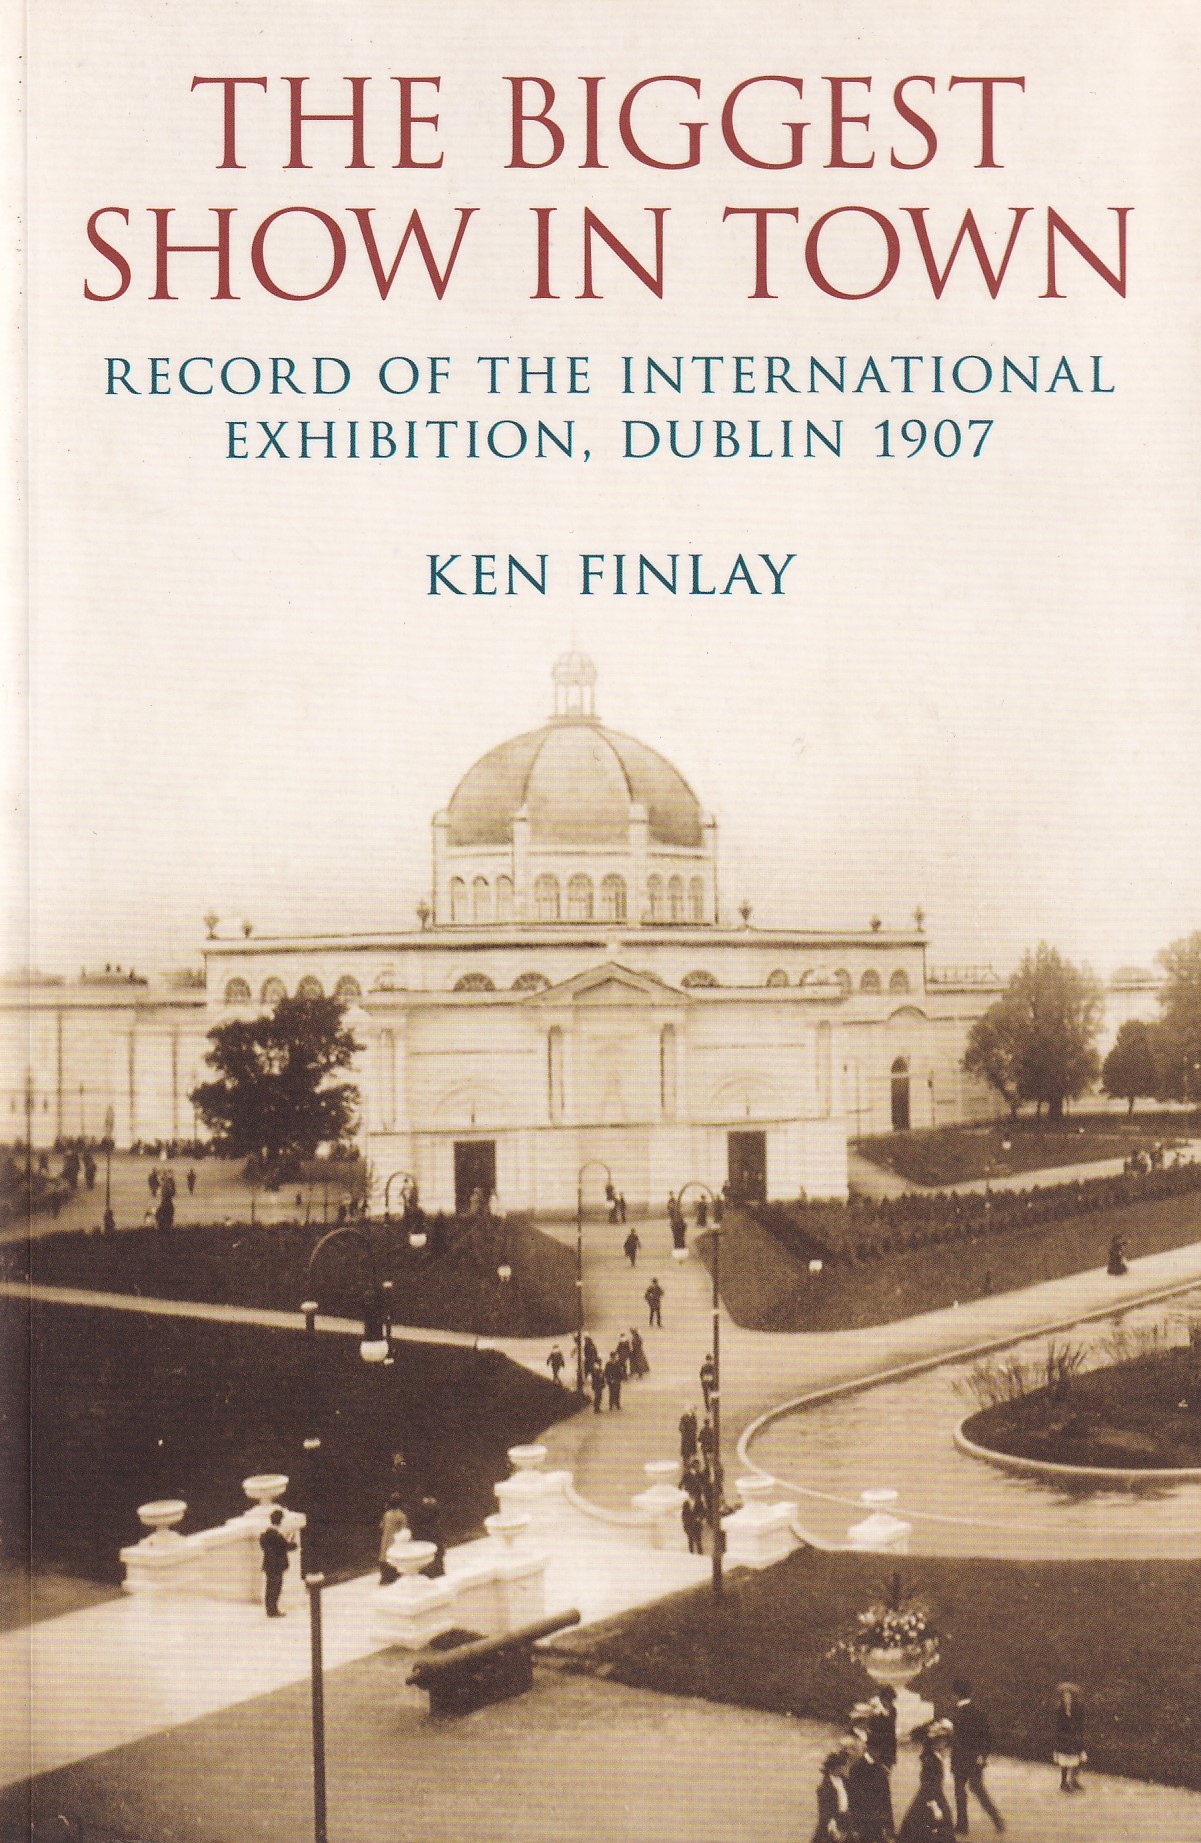 The Biggest Show in Town: Record of The International Exhibition, Dublin 1907 by Ken Finlay